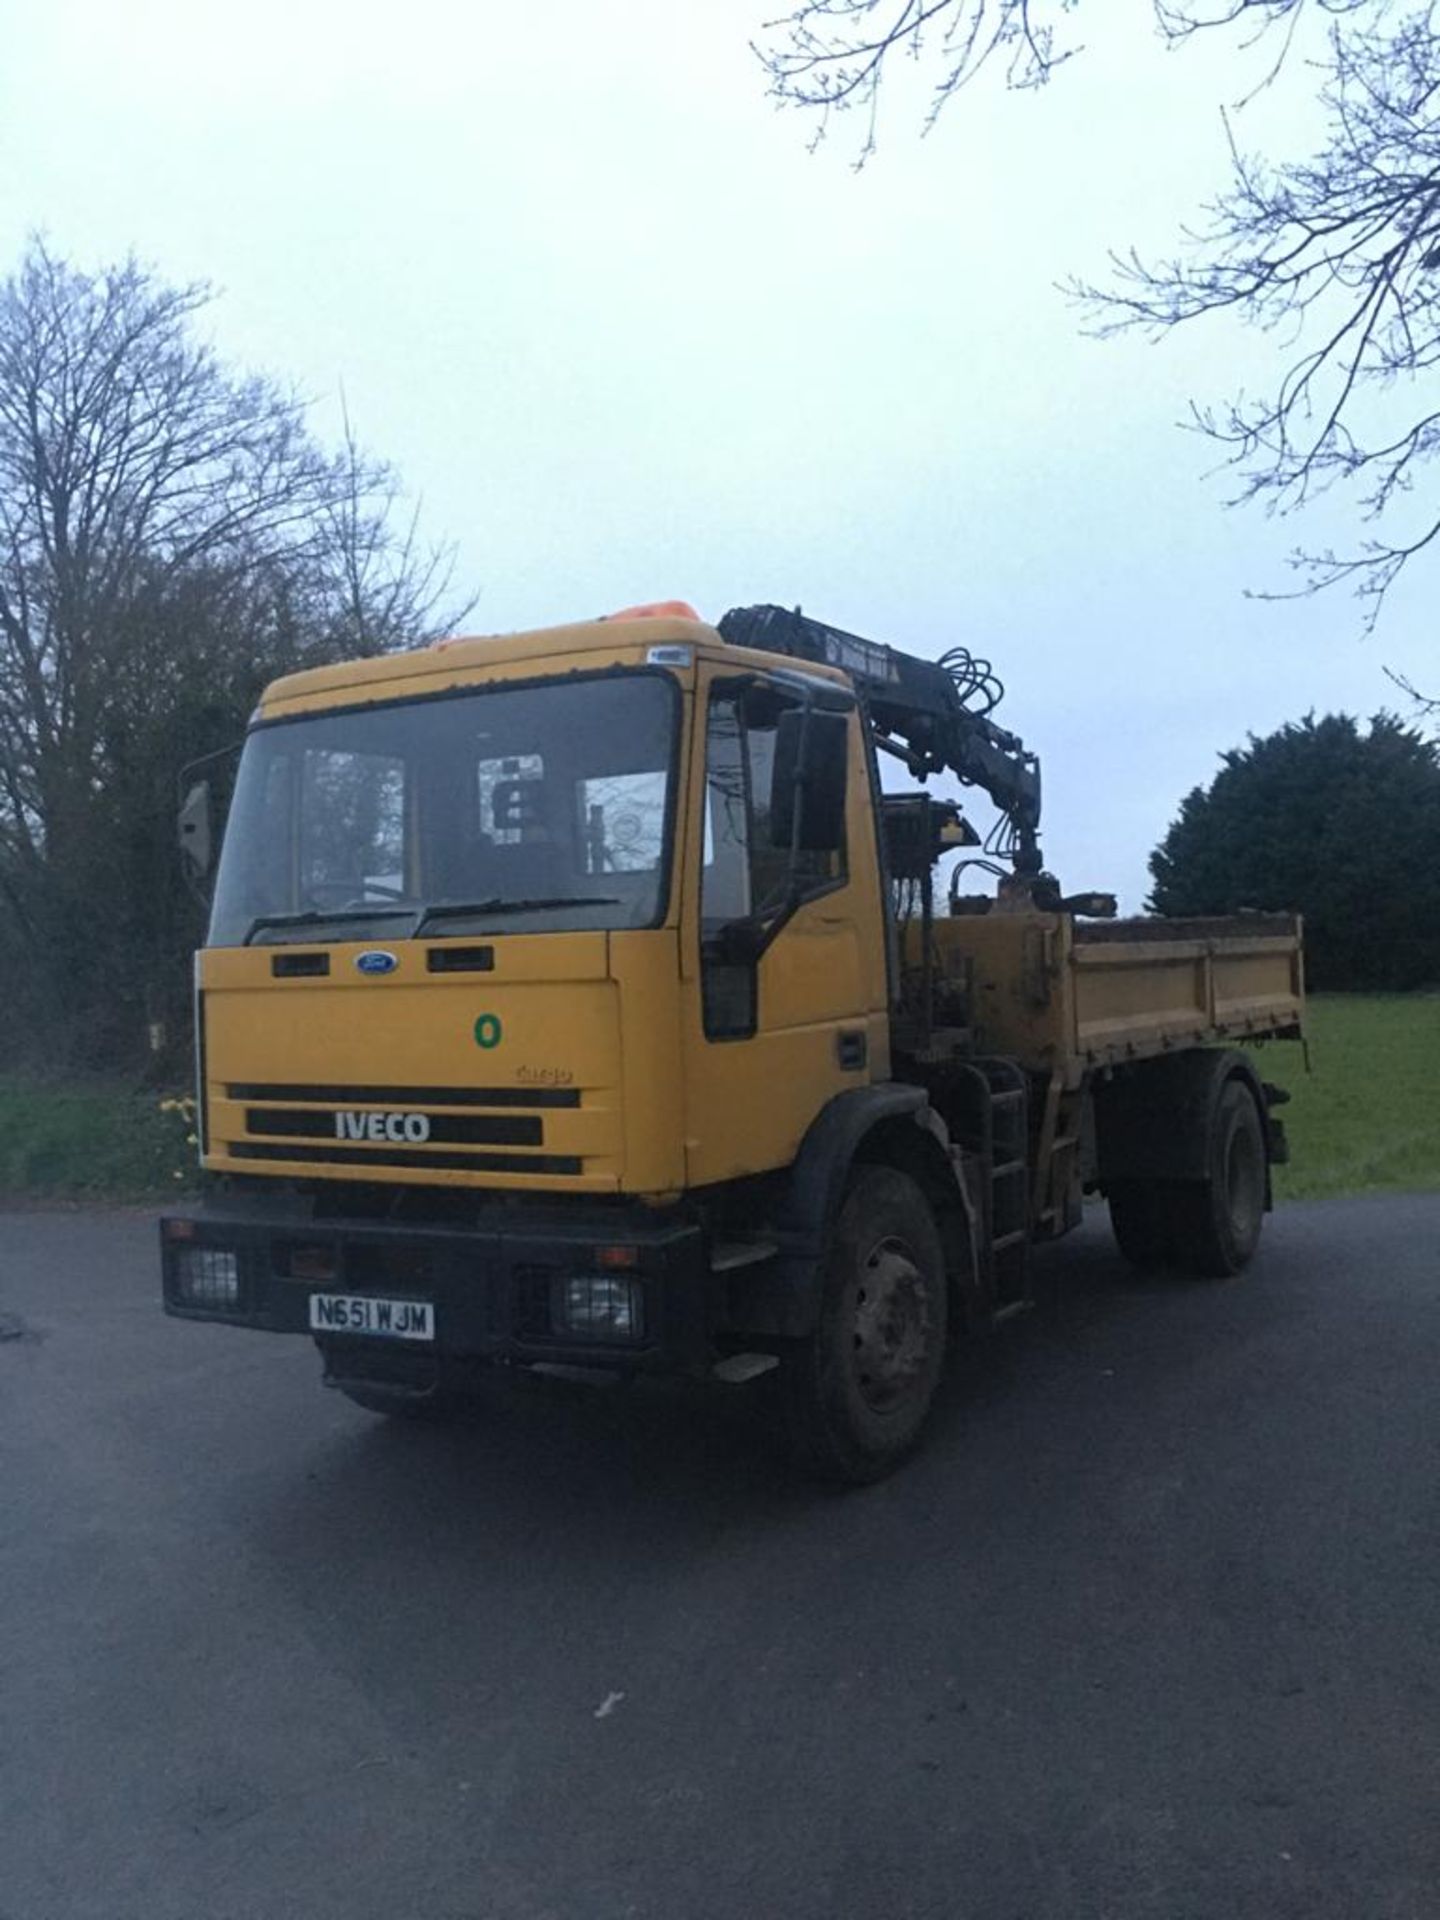 1996 IVECO-FORD 17000 KG GROSS - Image 4 of 20